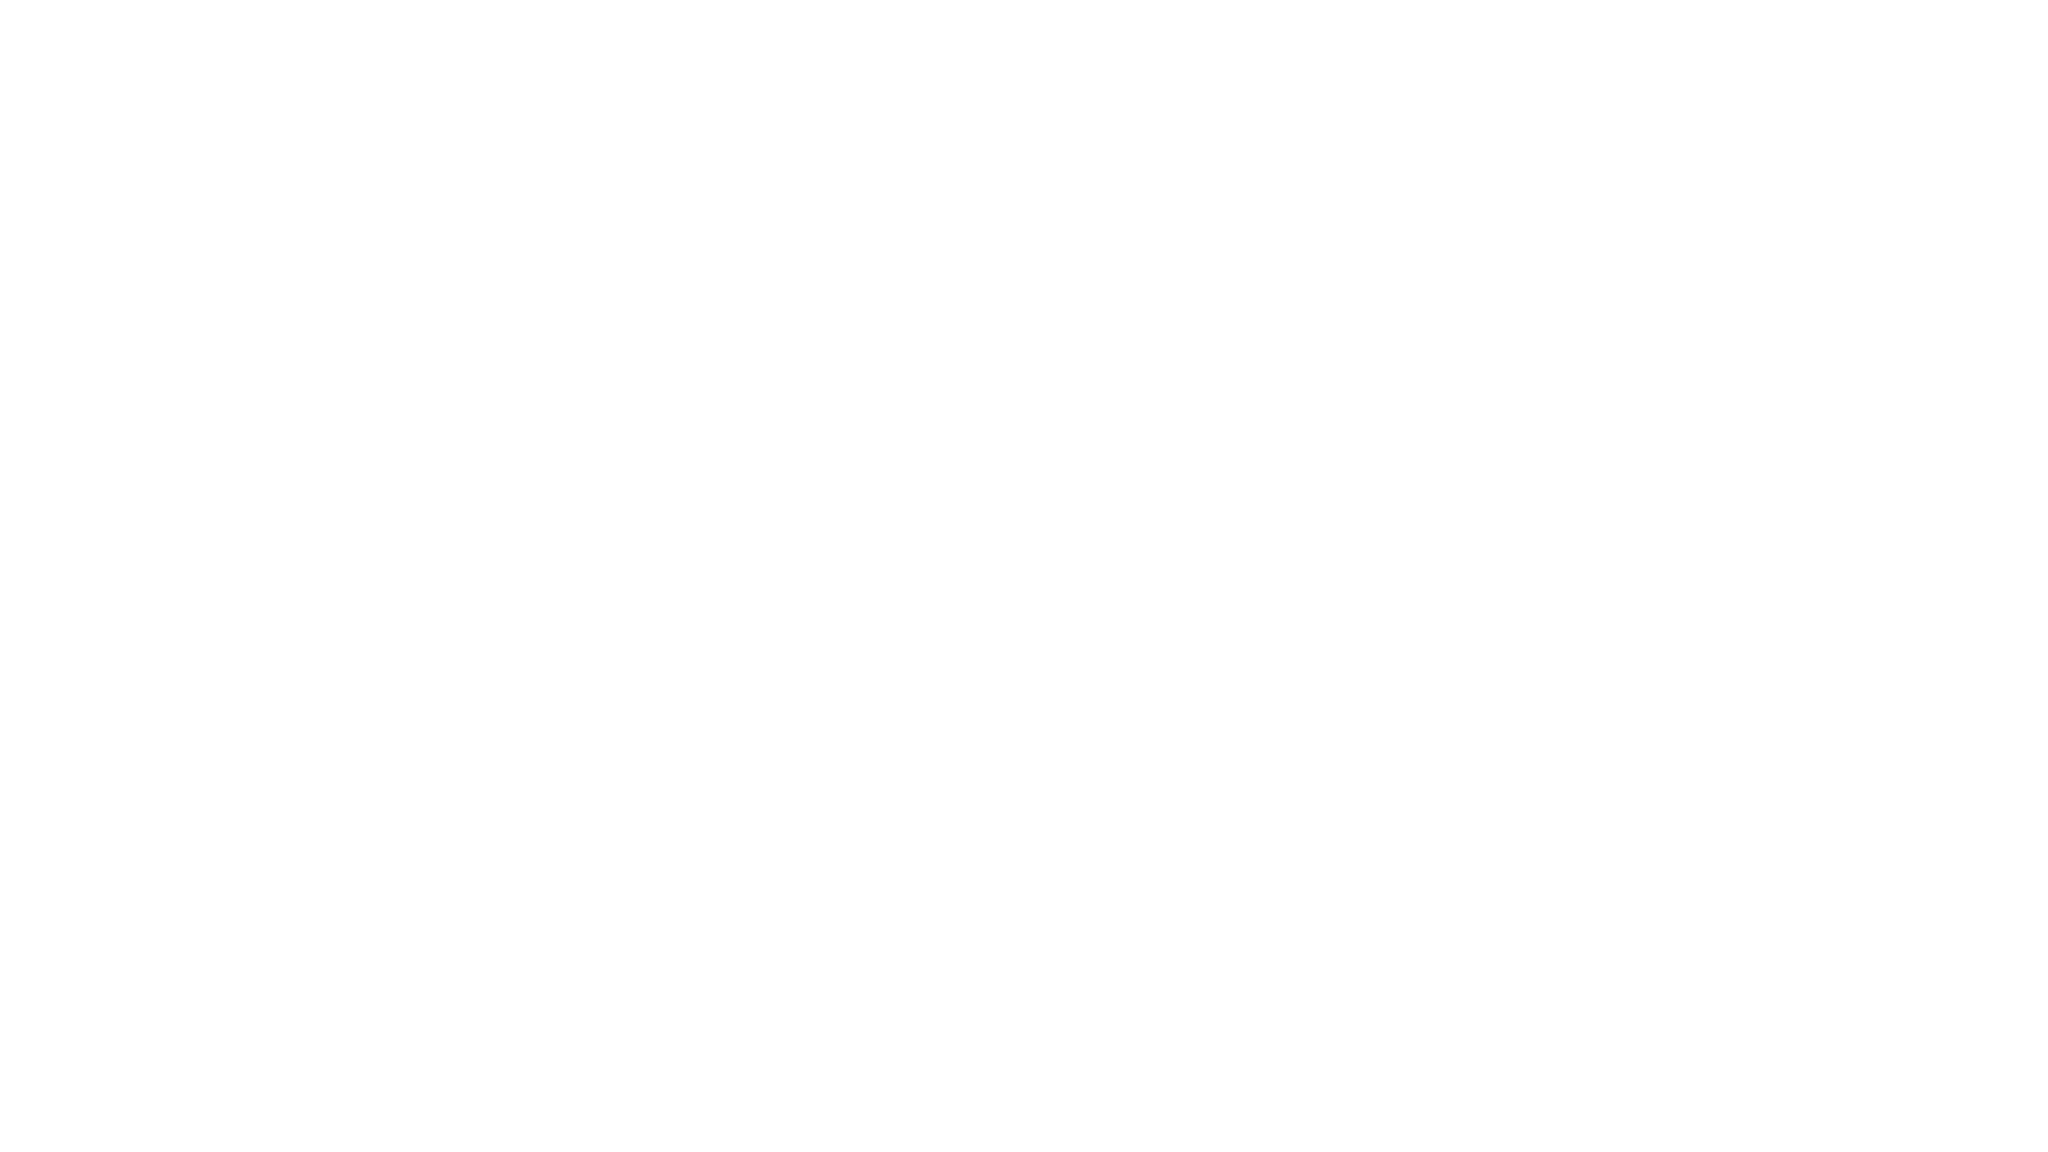 Guide To Best Summer Camps (2019) | America’s Finest Summer Camps